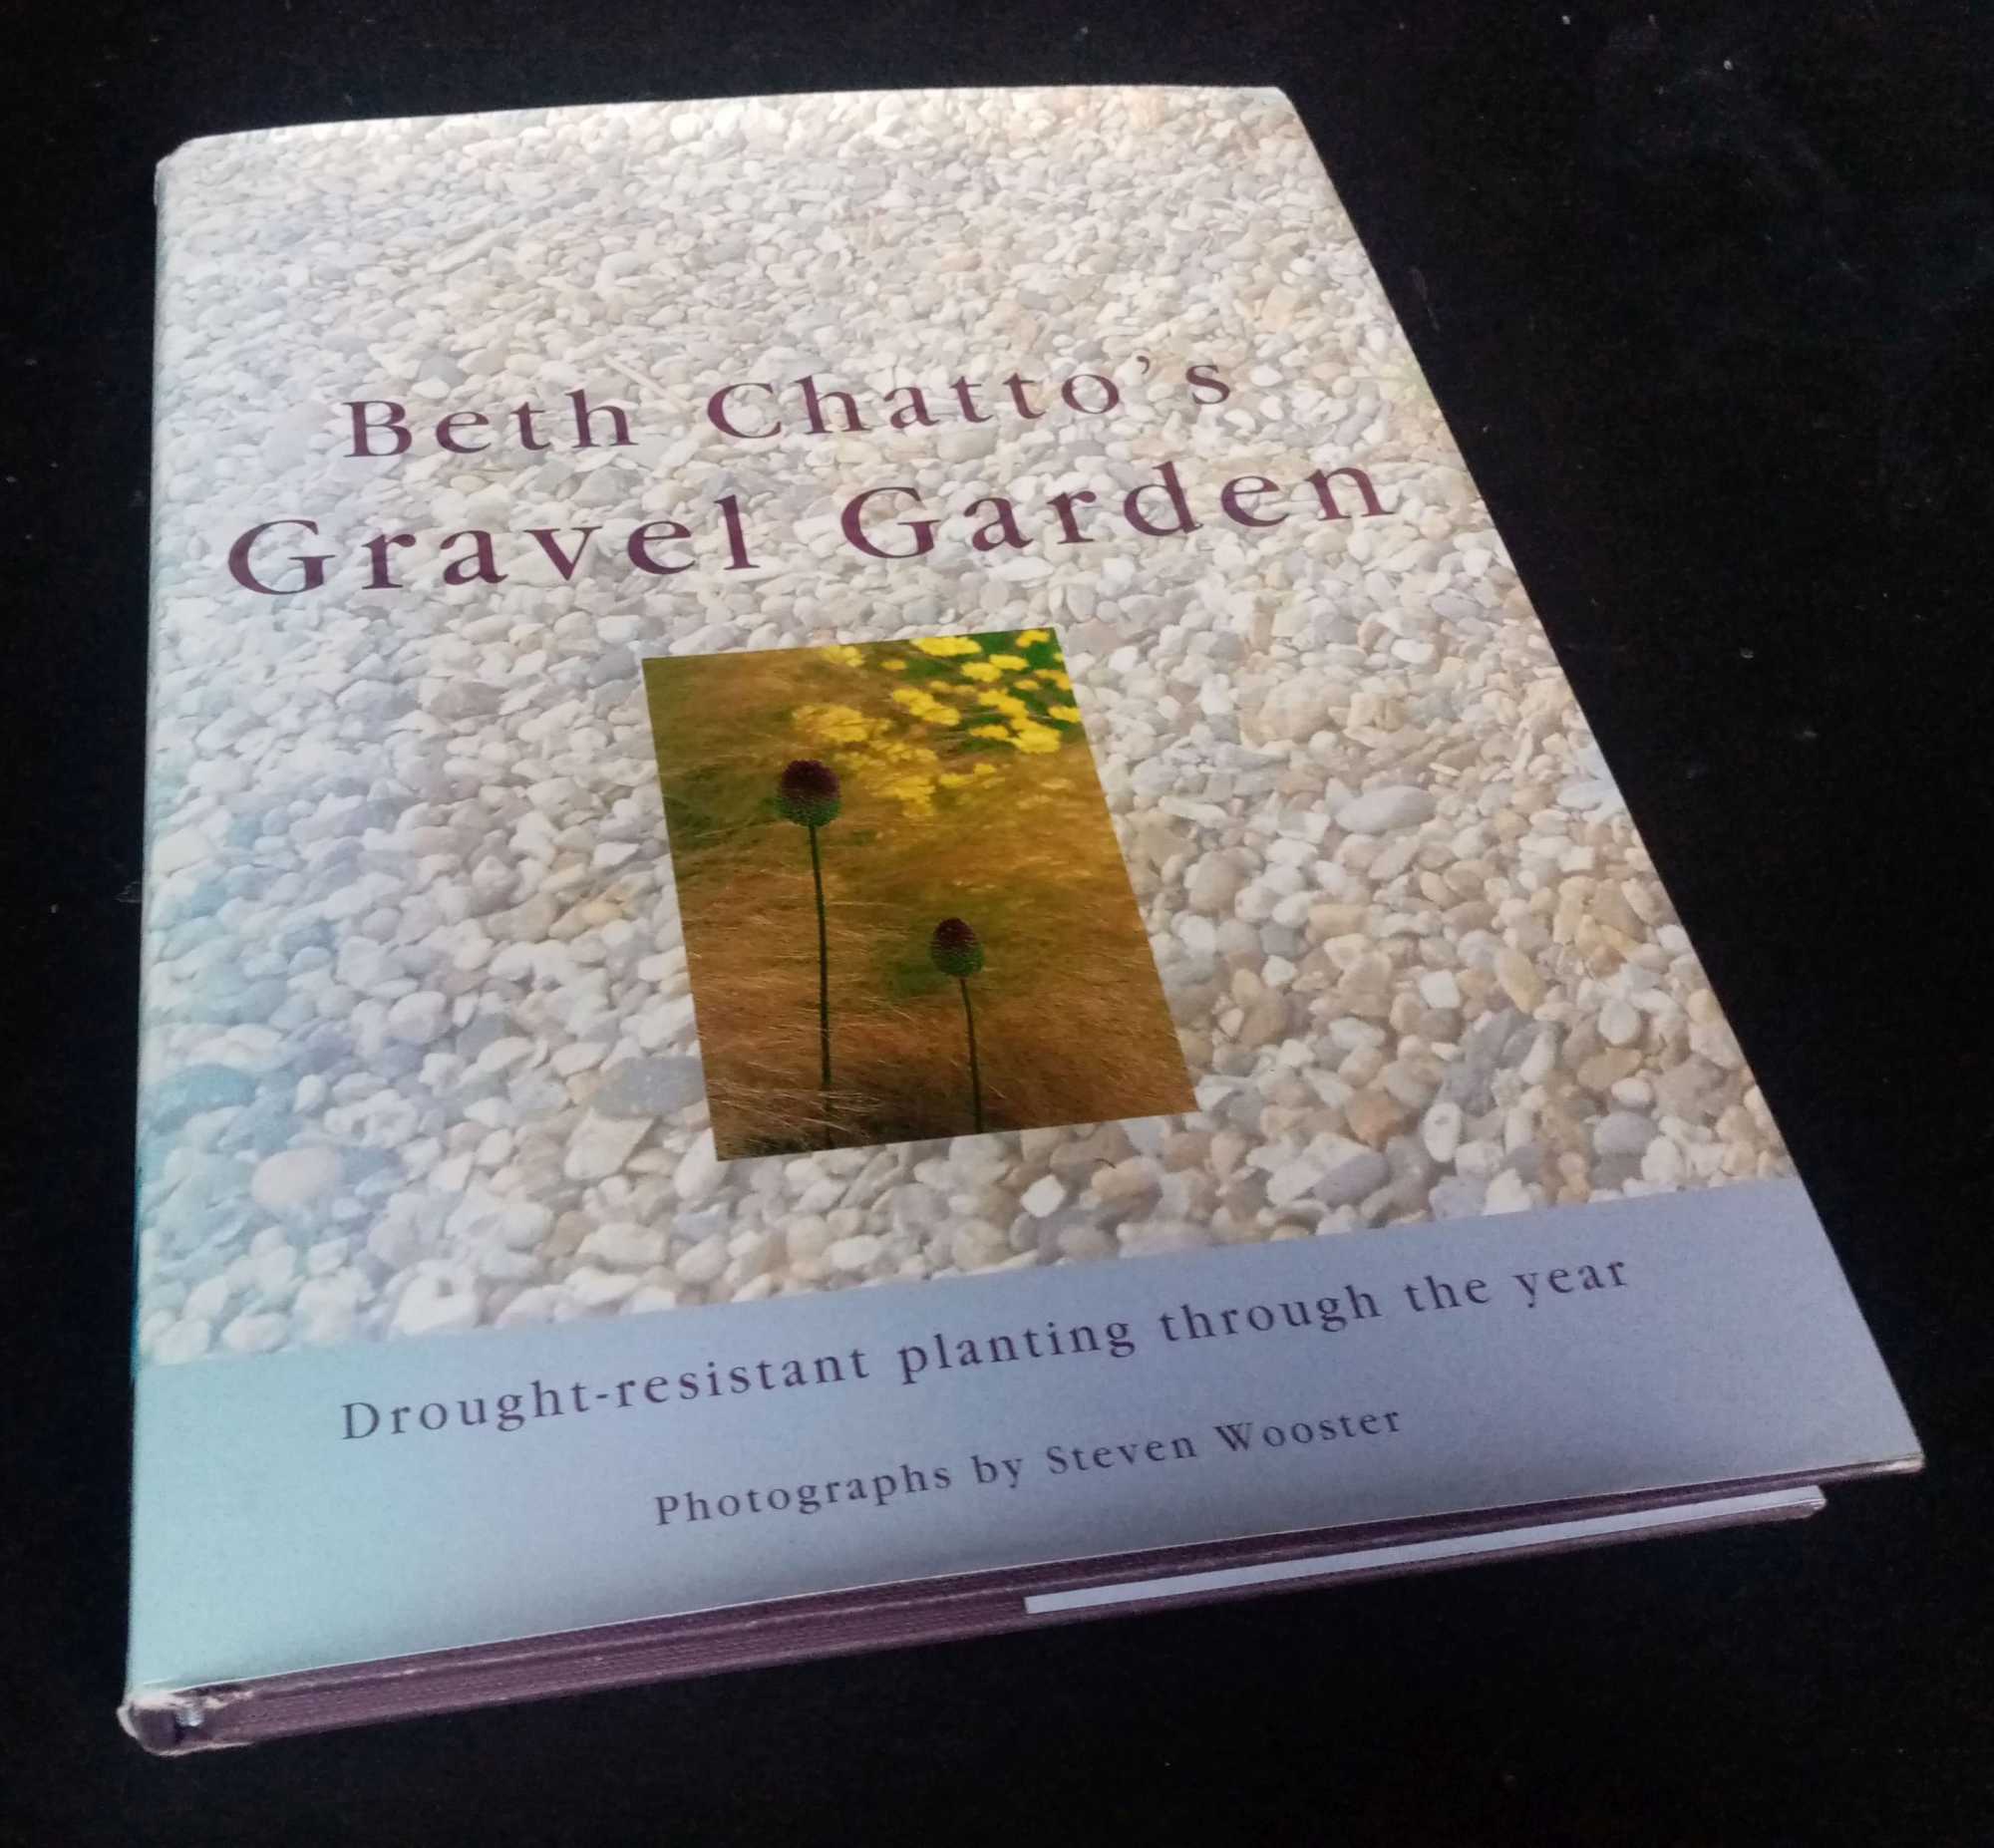 Beth Chatto - Beth Chatto's Gravel Garden: Drought-Resistant Planting Through the Year